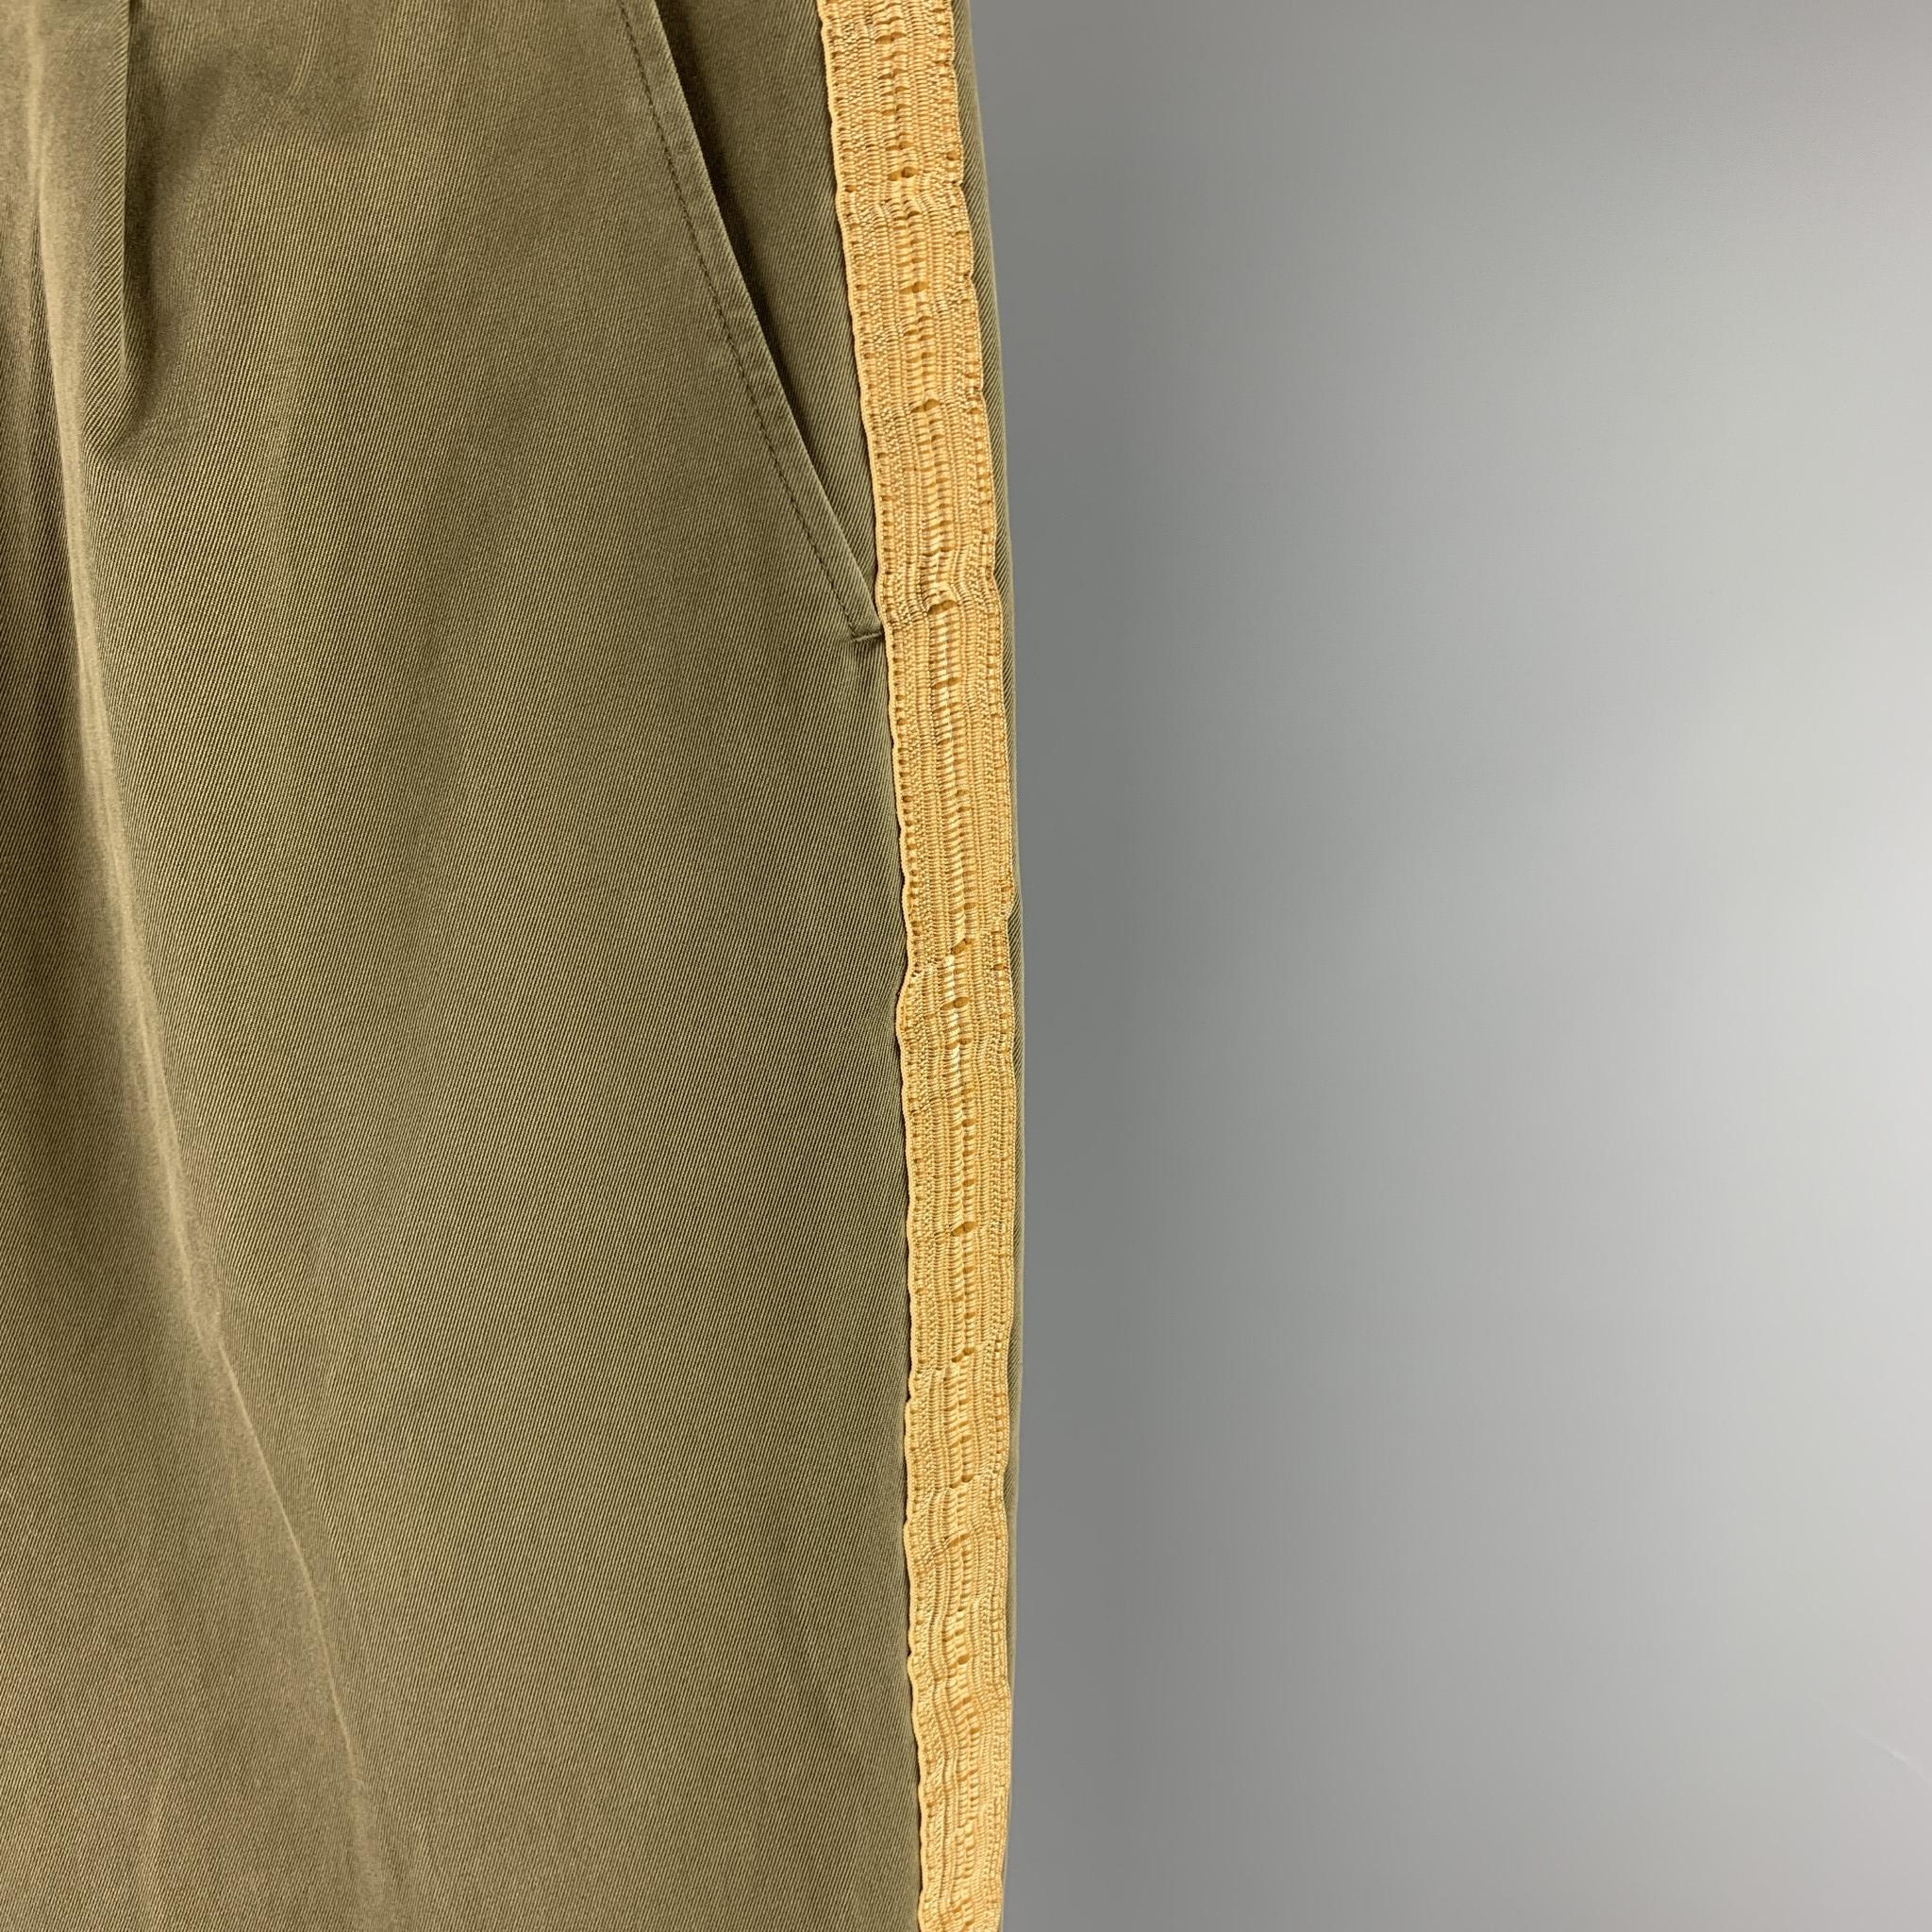 PALM ANGELS dress pants comes in a olive cotton with a gold ribbon stripe design featuring a pleated style, regular fit, cuffed leg, and a button fly closure. Made in Italy.

Excellent Pre-Owned Condition.
Marked: IT 54
Original Retail Price: